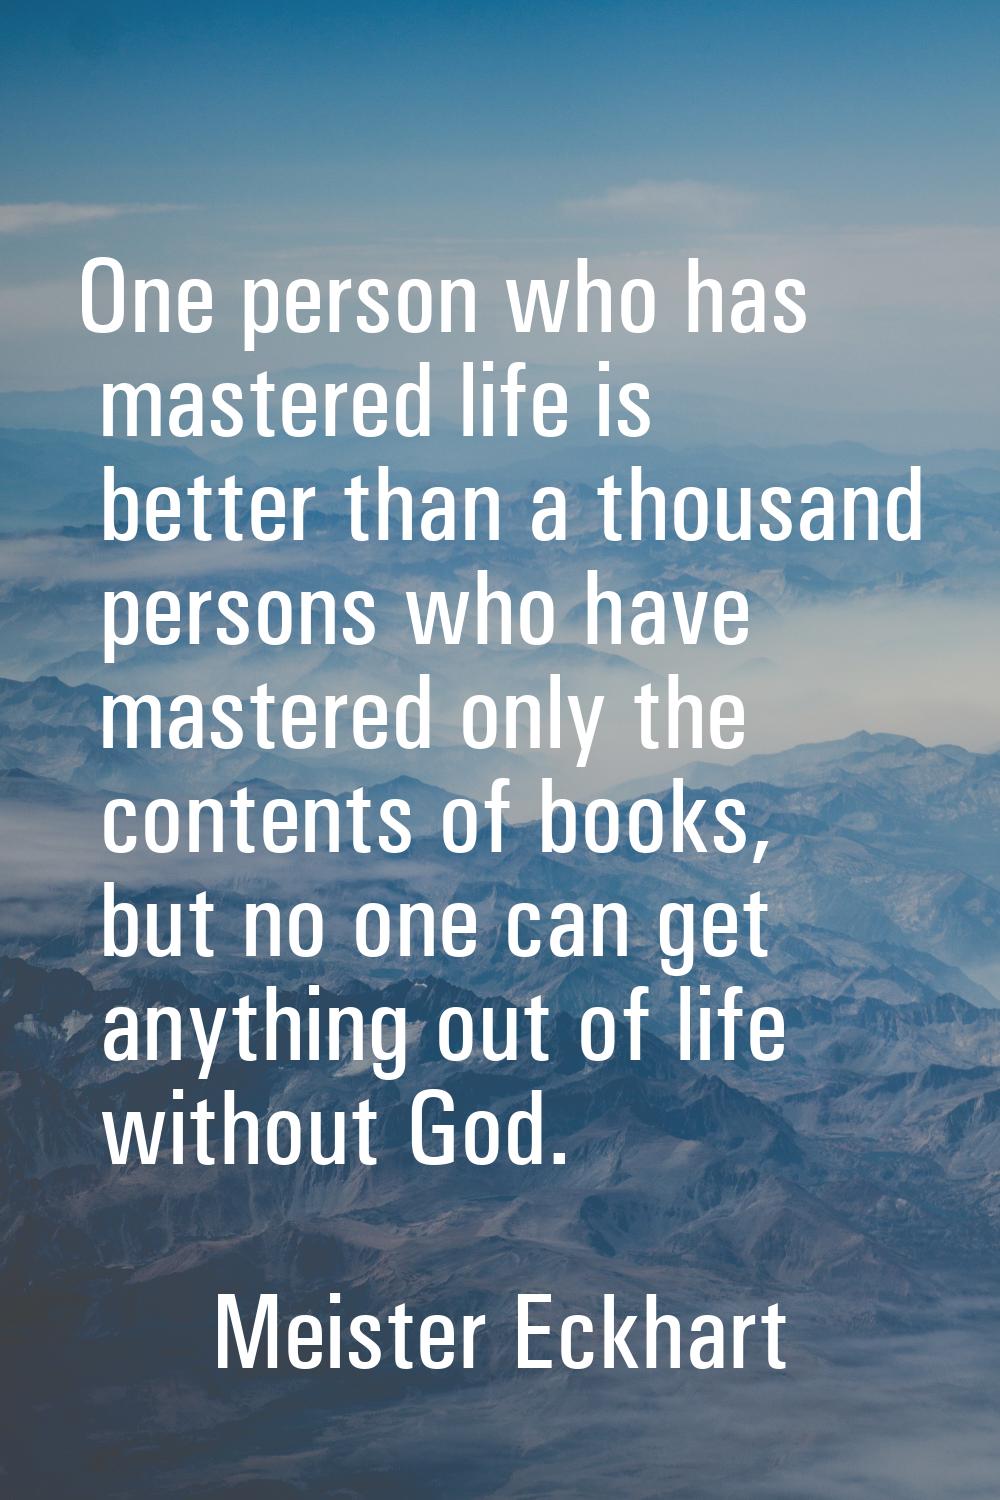 One person who has mastered life is better than a thousand persons who have mastered only the conte